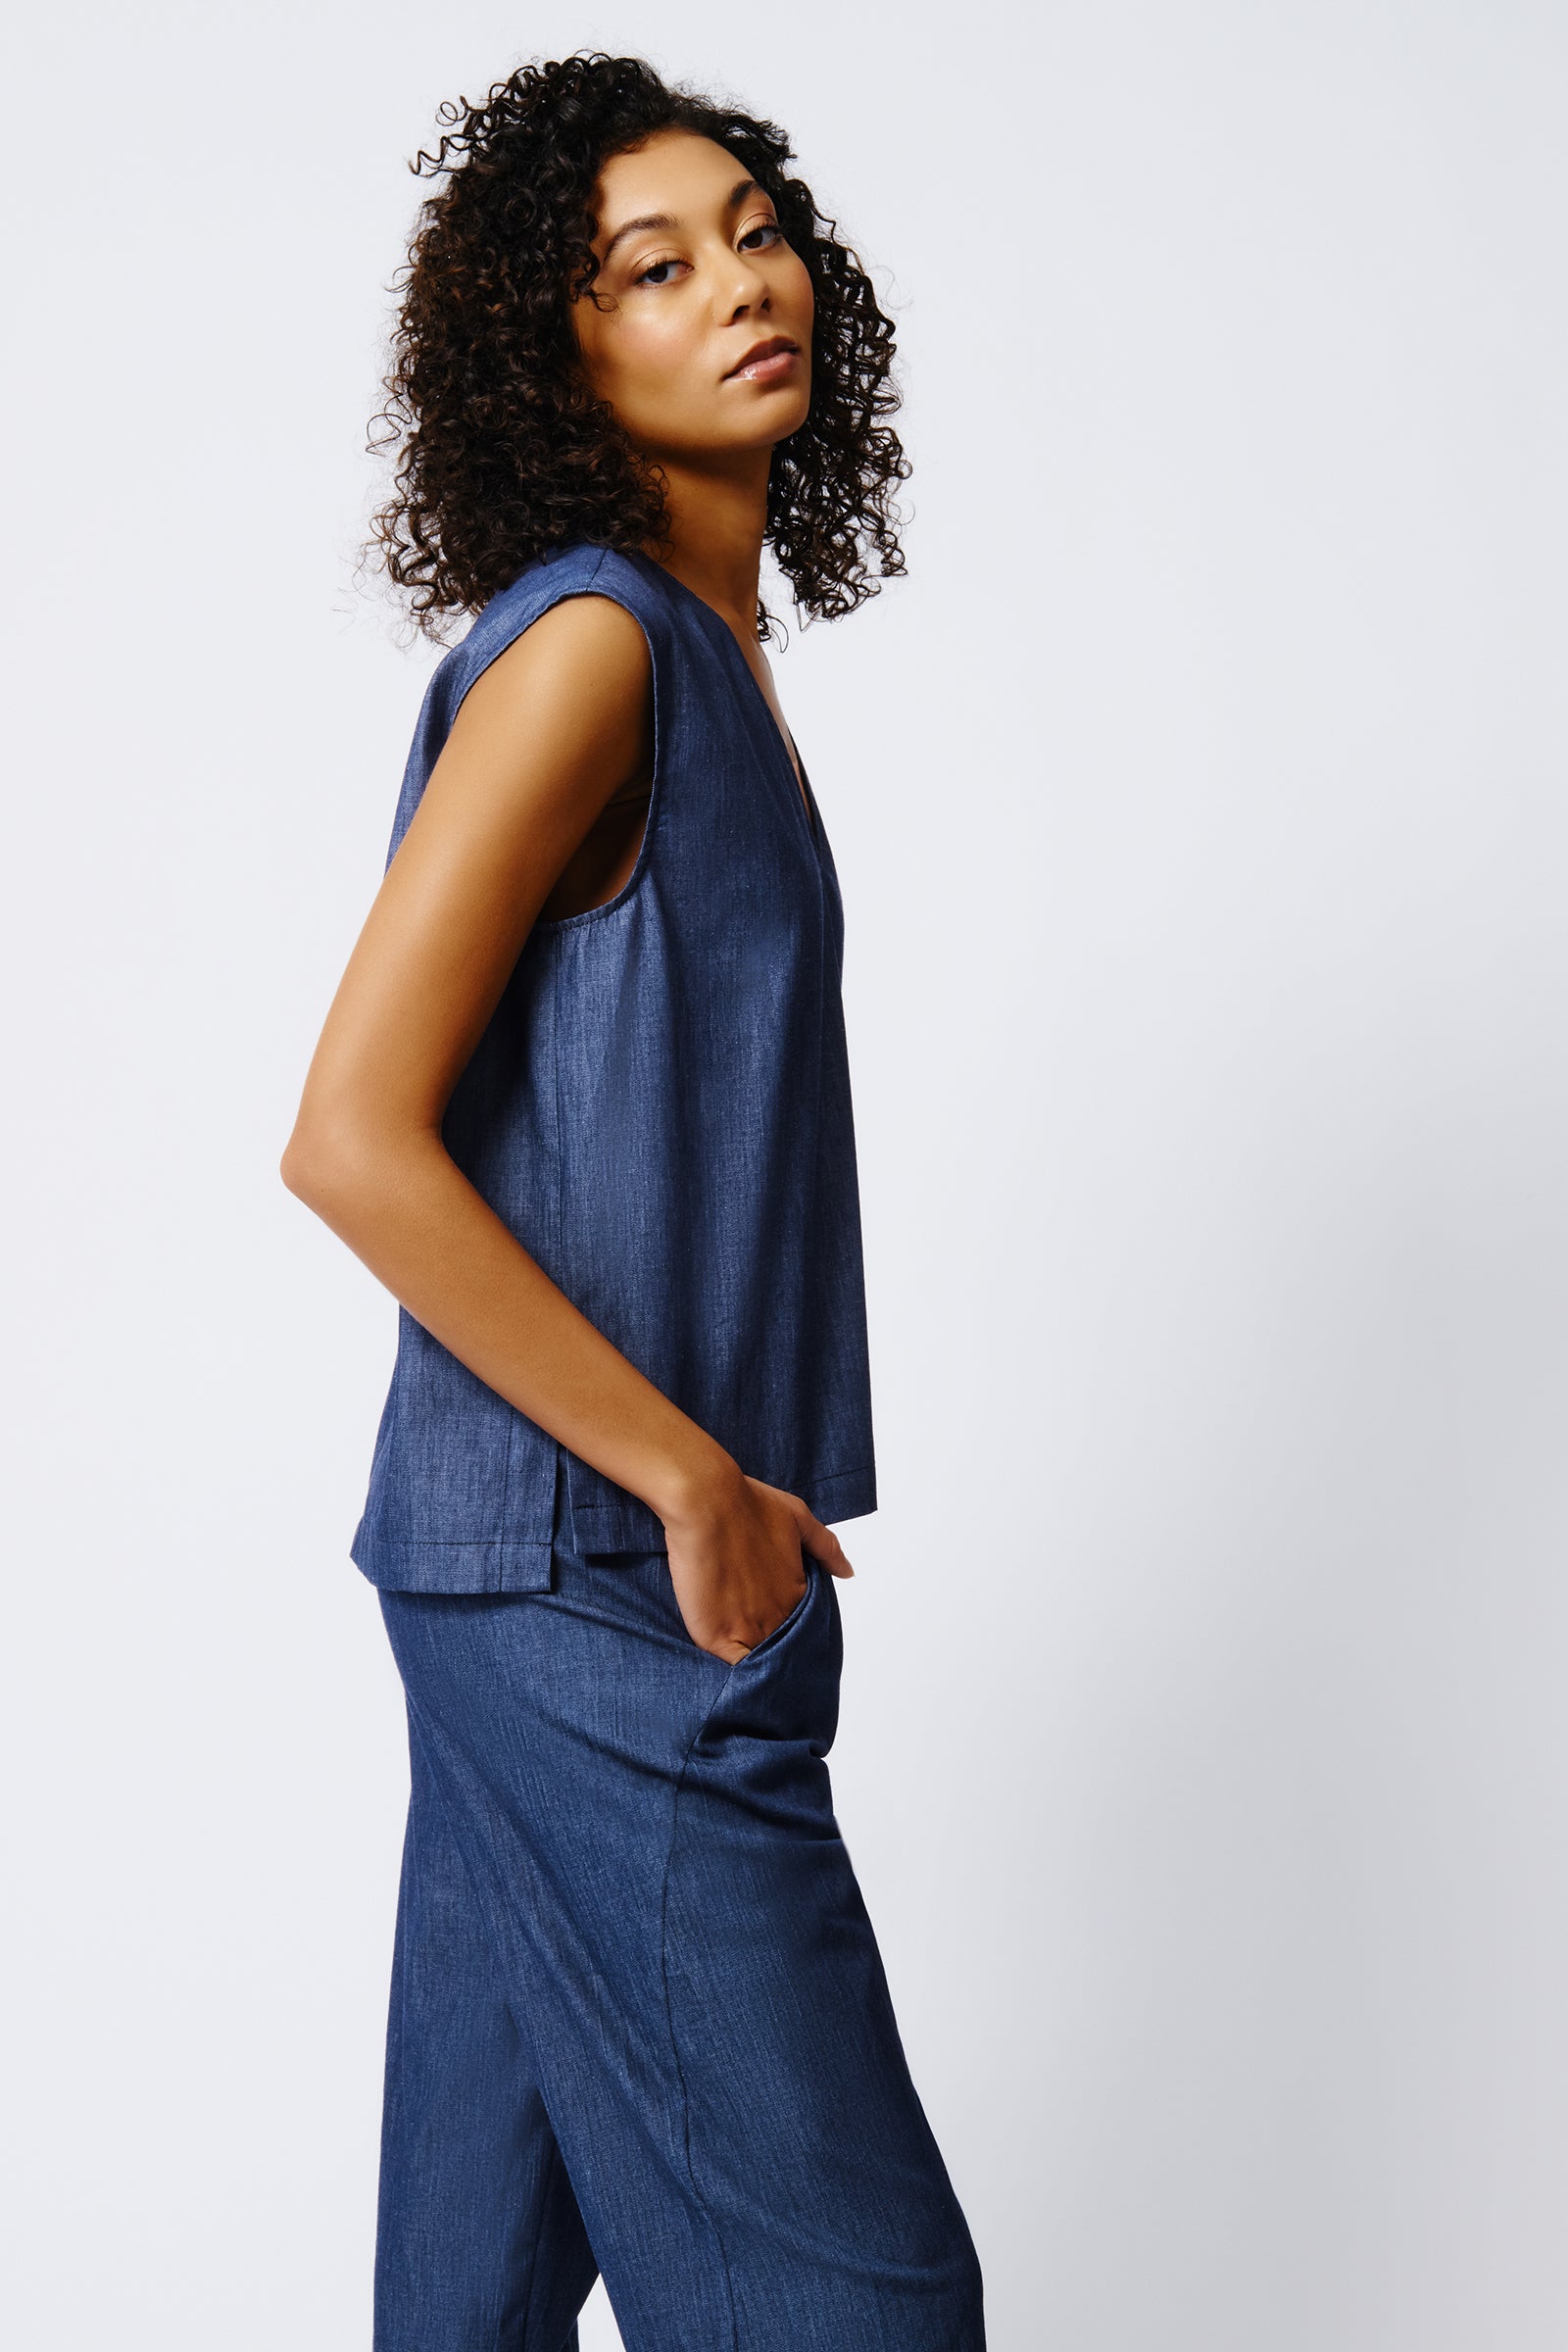 Kal Rieman Ava V Neck Shell in Classic Indigo on Model Side View Crop